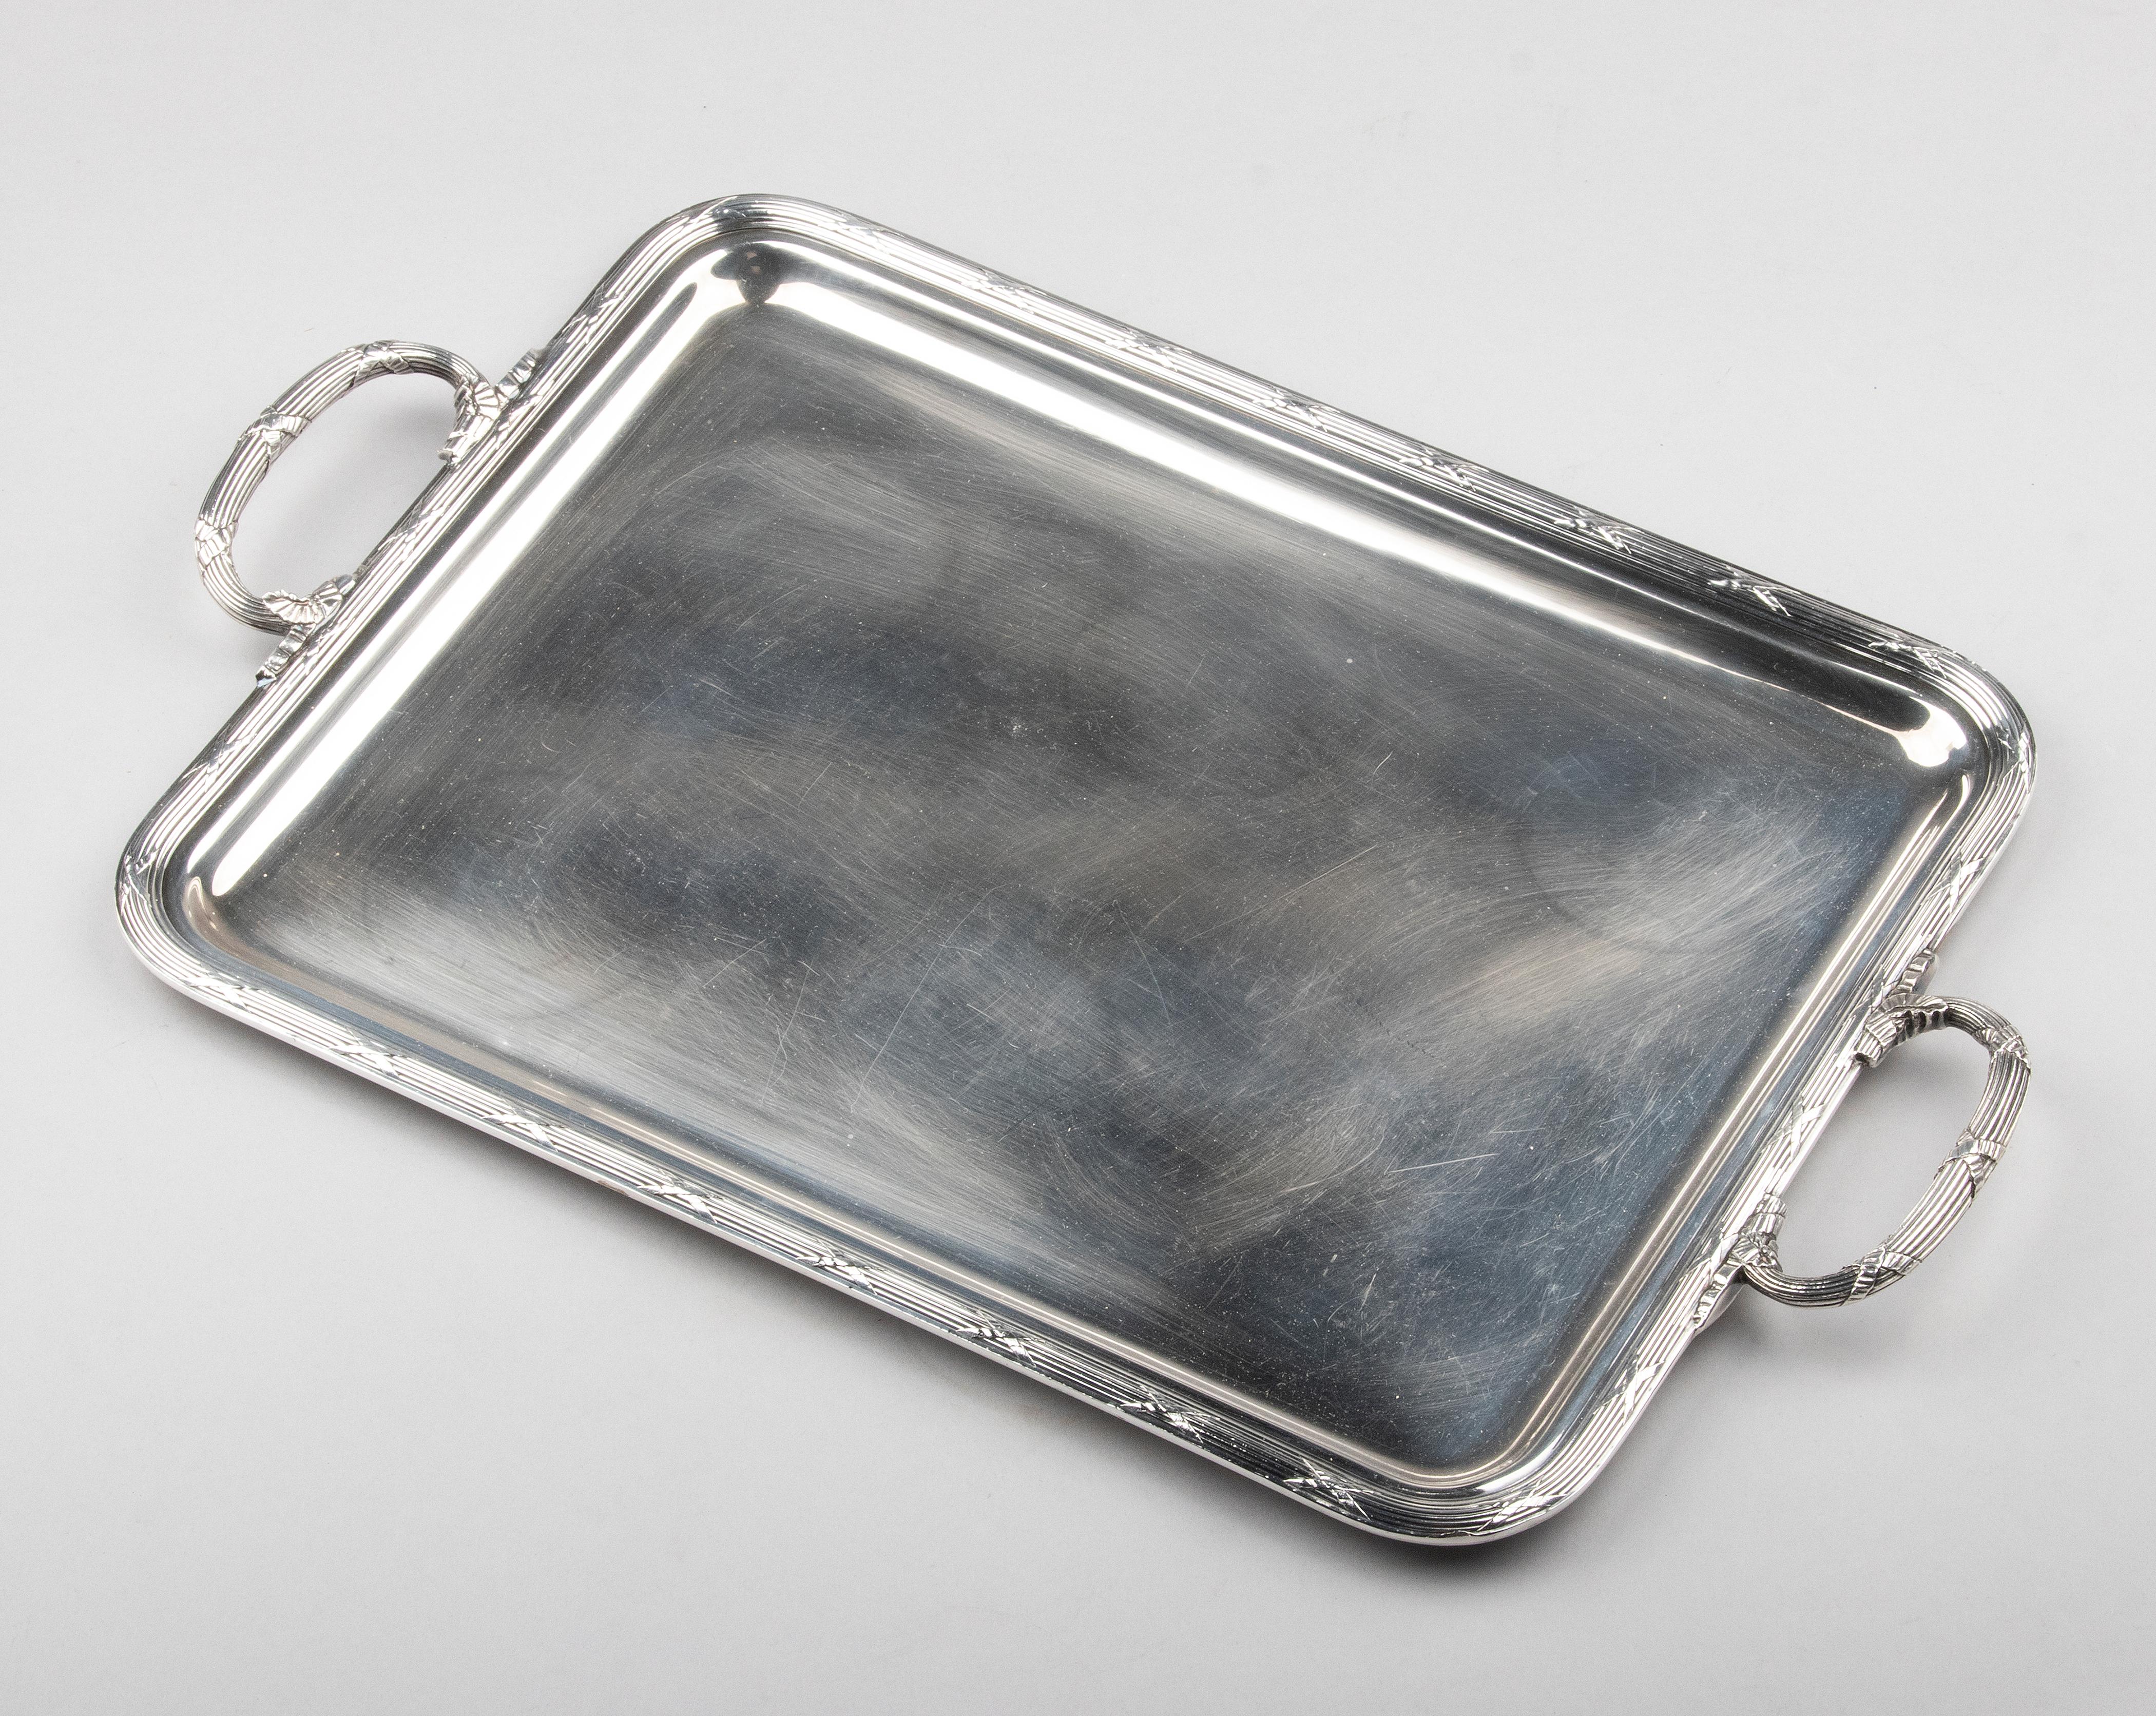 Mid-Century Modern Silver Plated Serving Tray Made by Christofle France 12